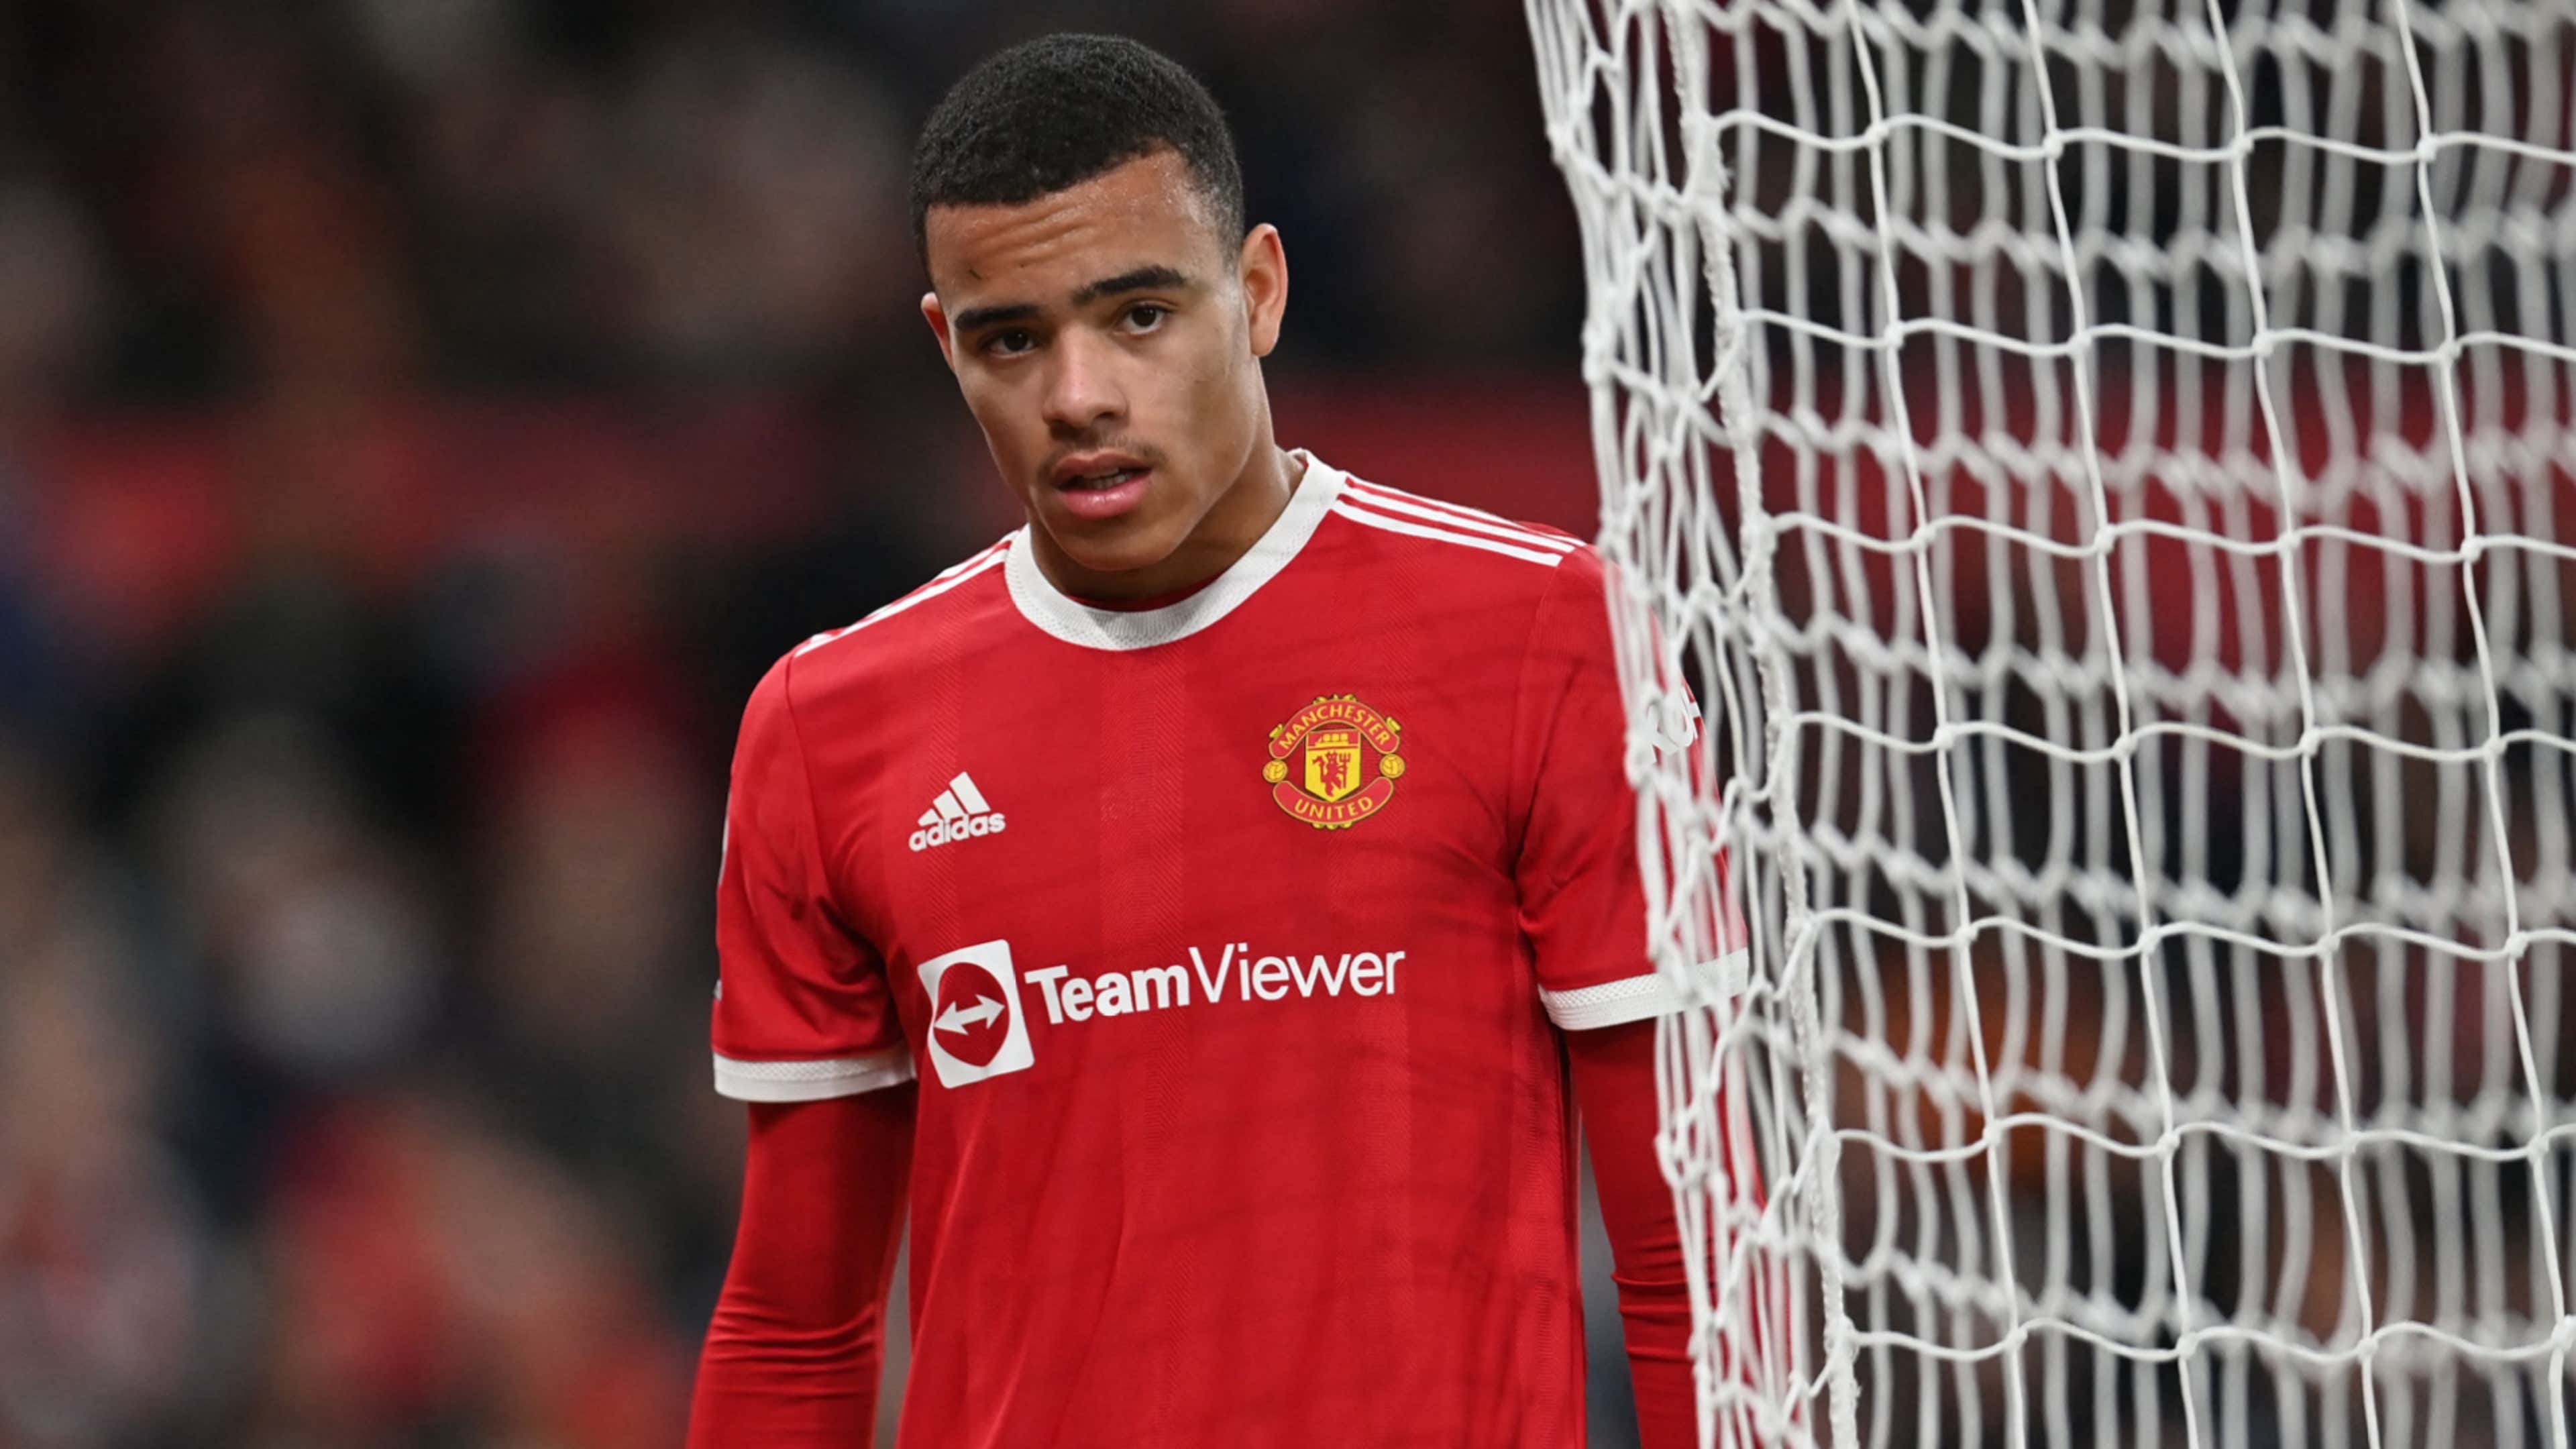 Absolutely not' - Mason Greenwood told he cannot restart career in England  after Man Utd's decision to let him go | Goal.com